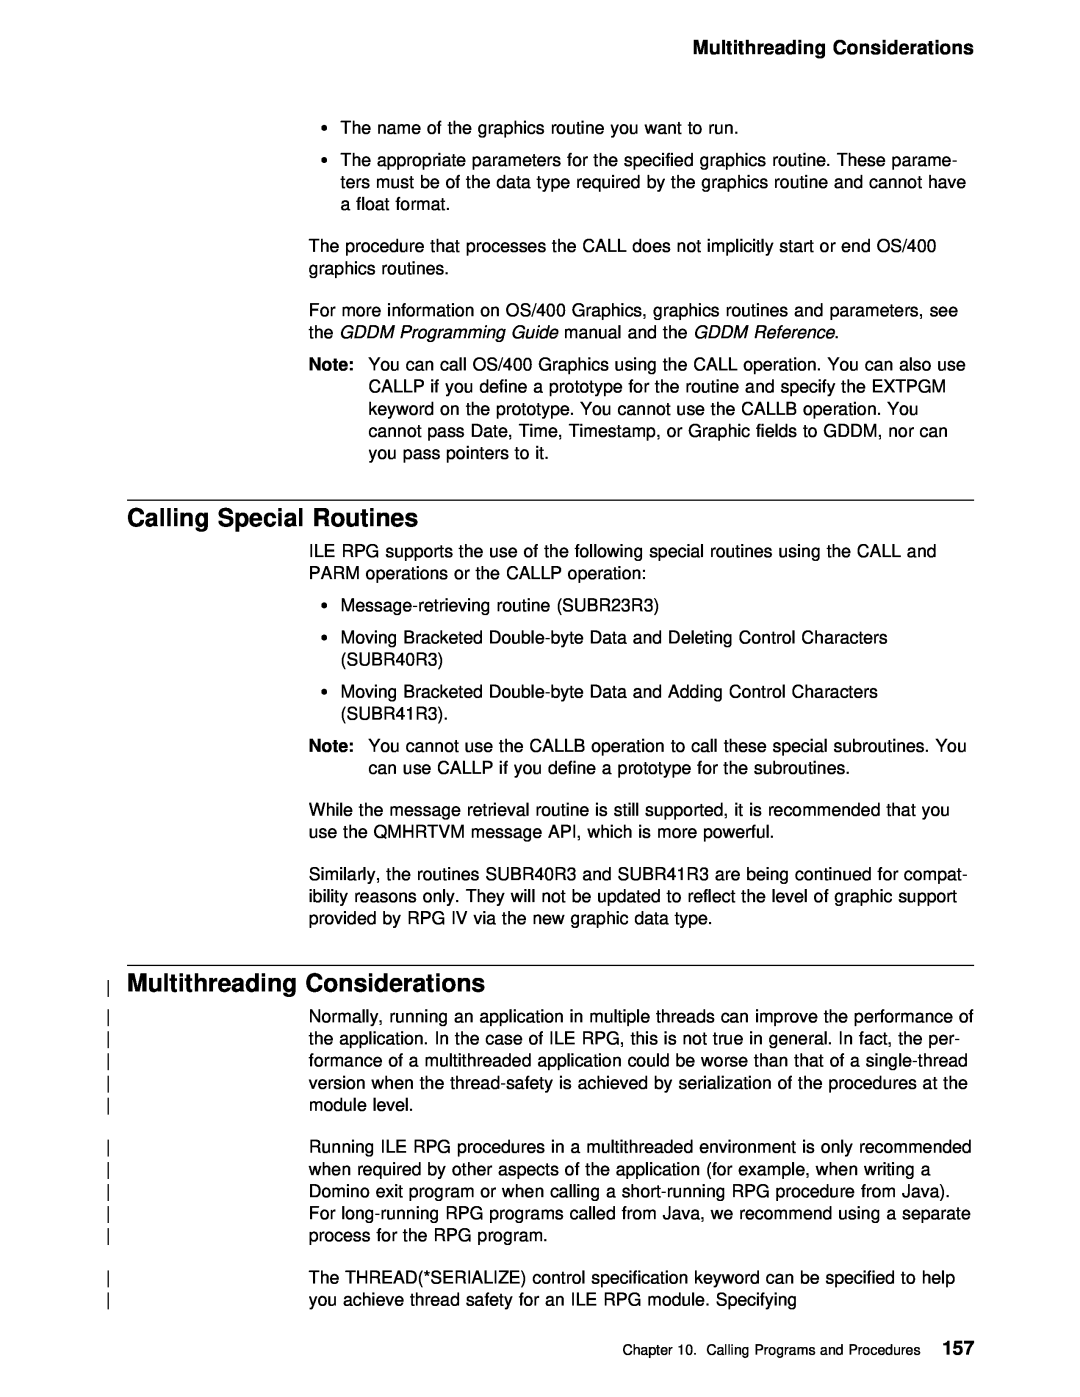 IBM AS/400 manual Calling Special Routines, Multithreading Considerations 